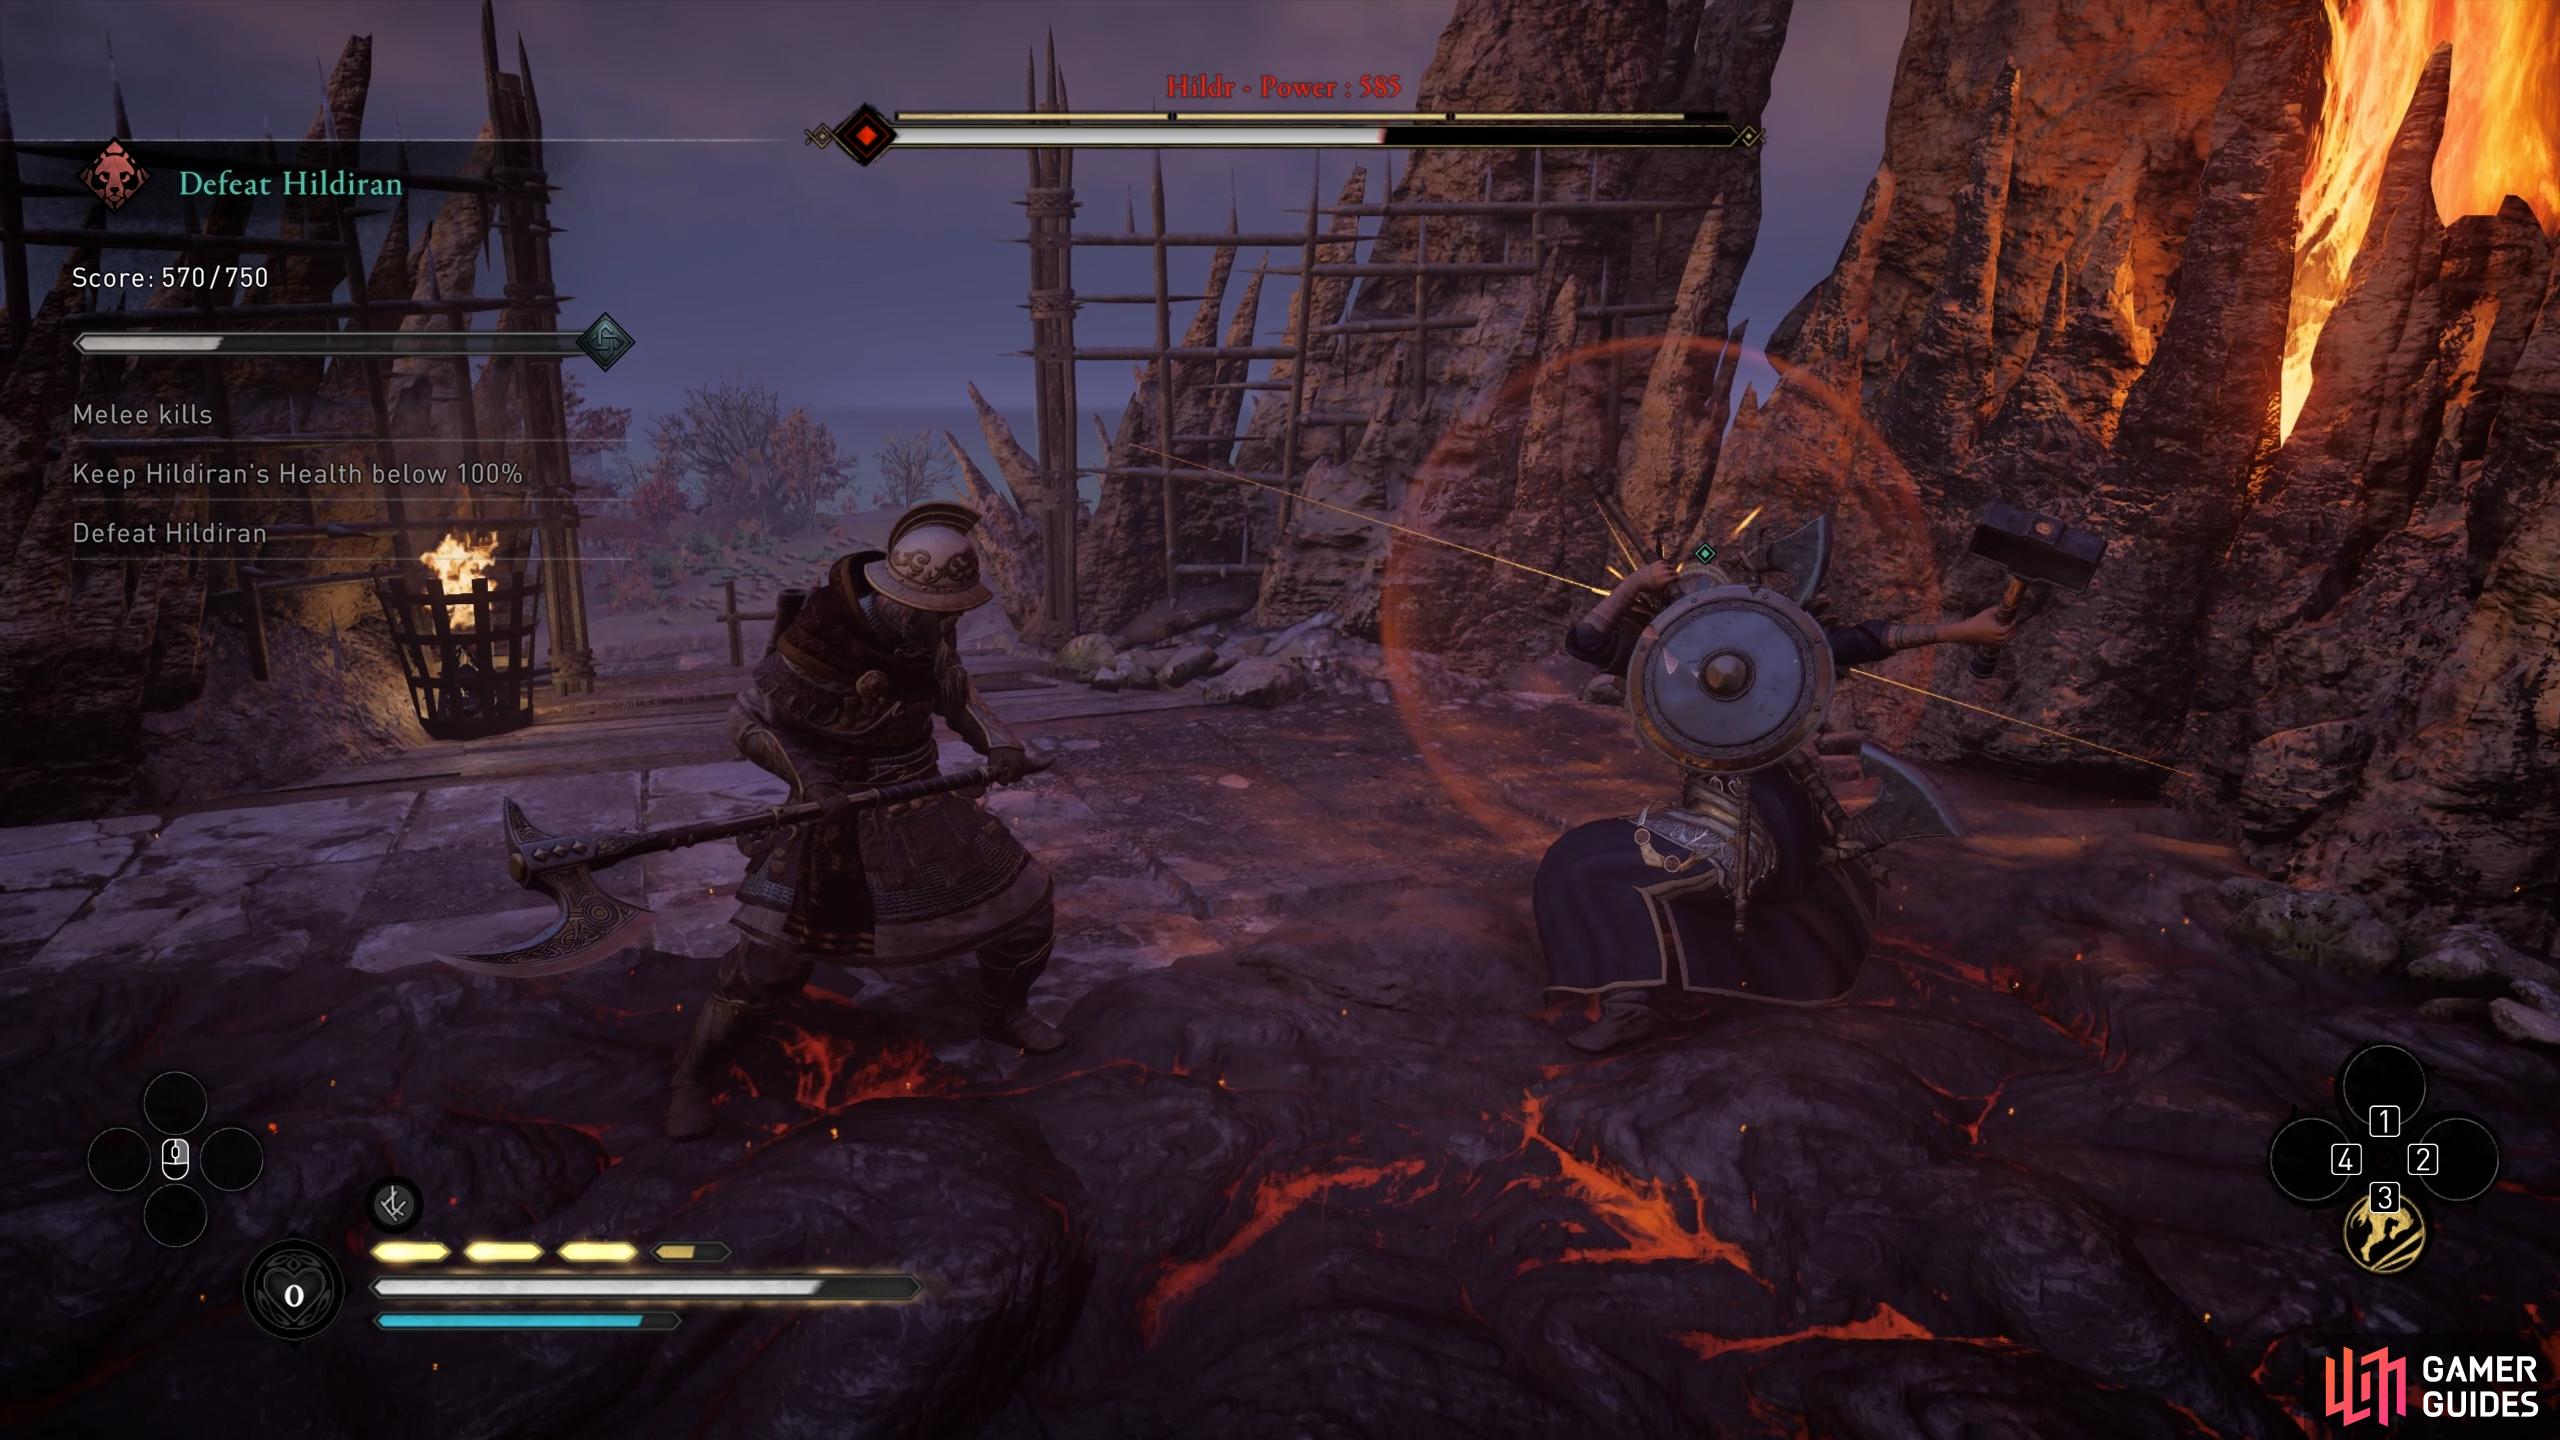 You can try to parry Hildiran attacks, but you're better off dodging them to avoid taking damage.